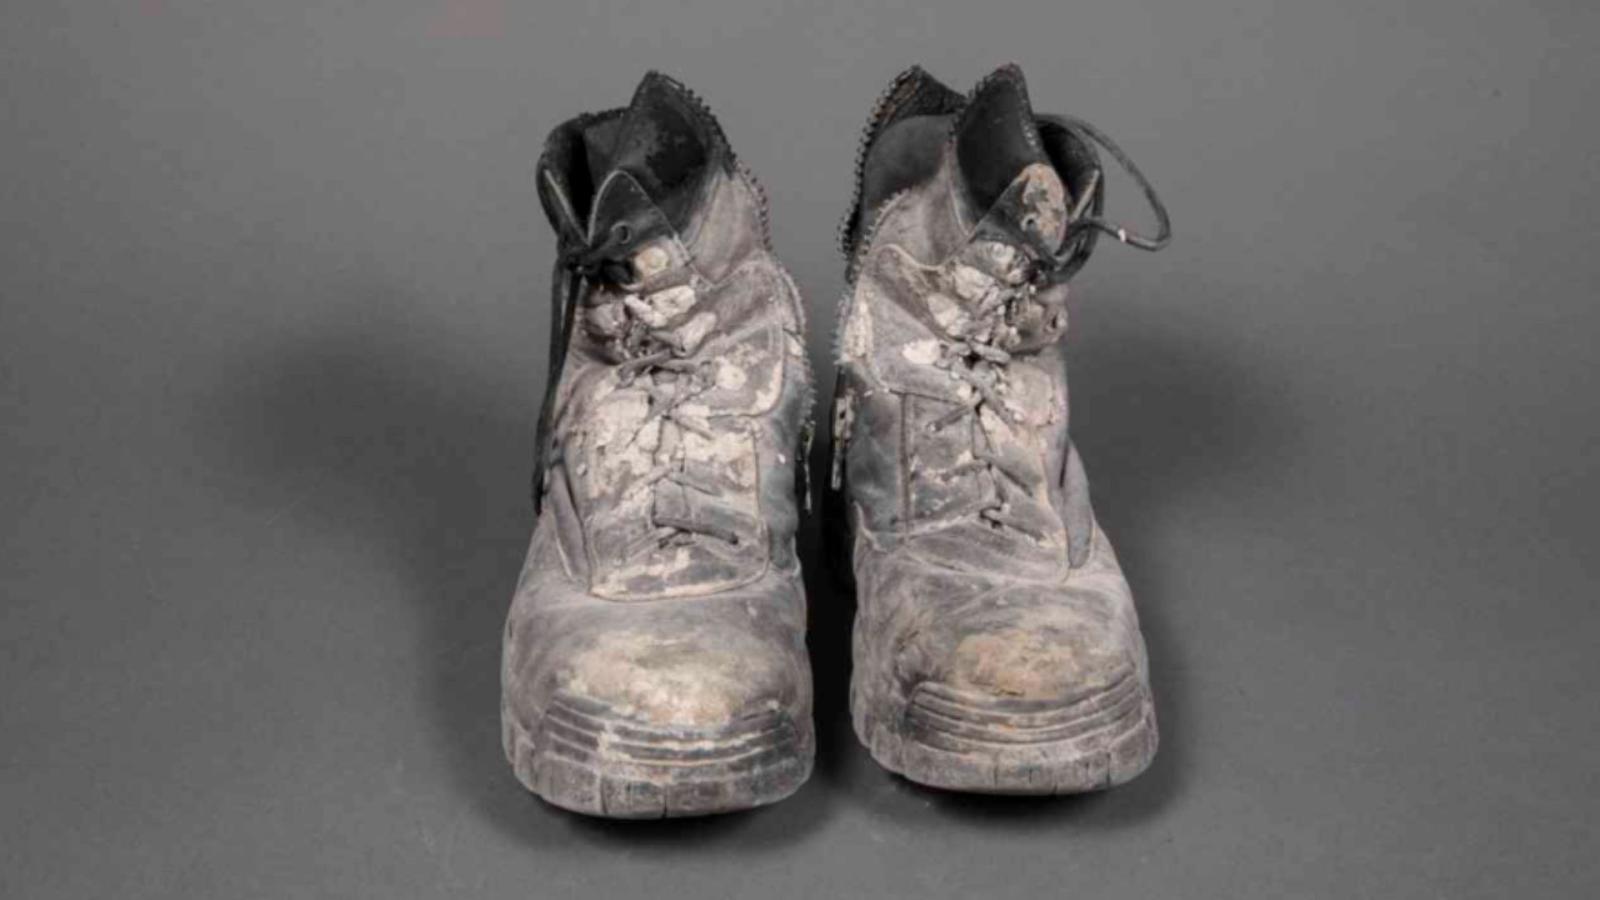 Battered work boots covered in dust and debris